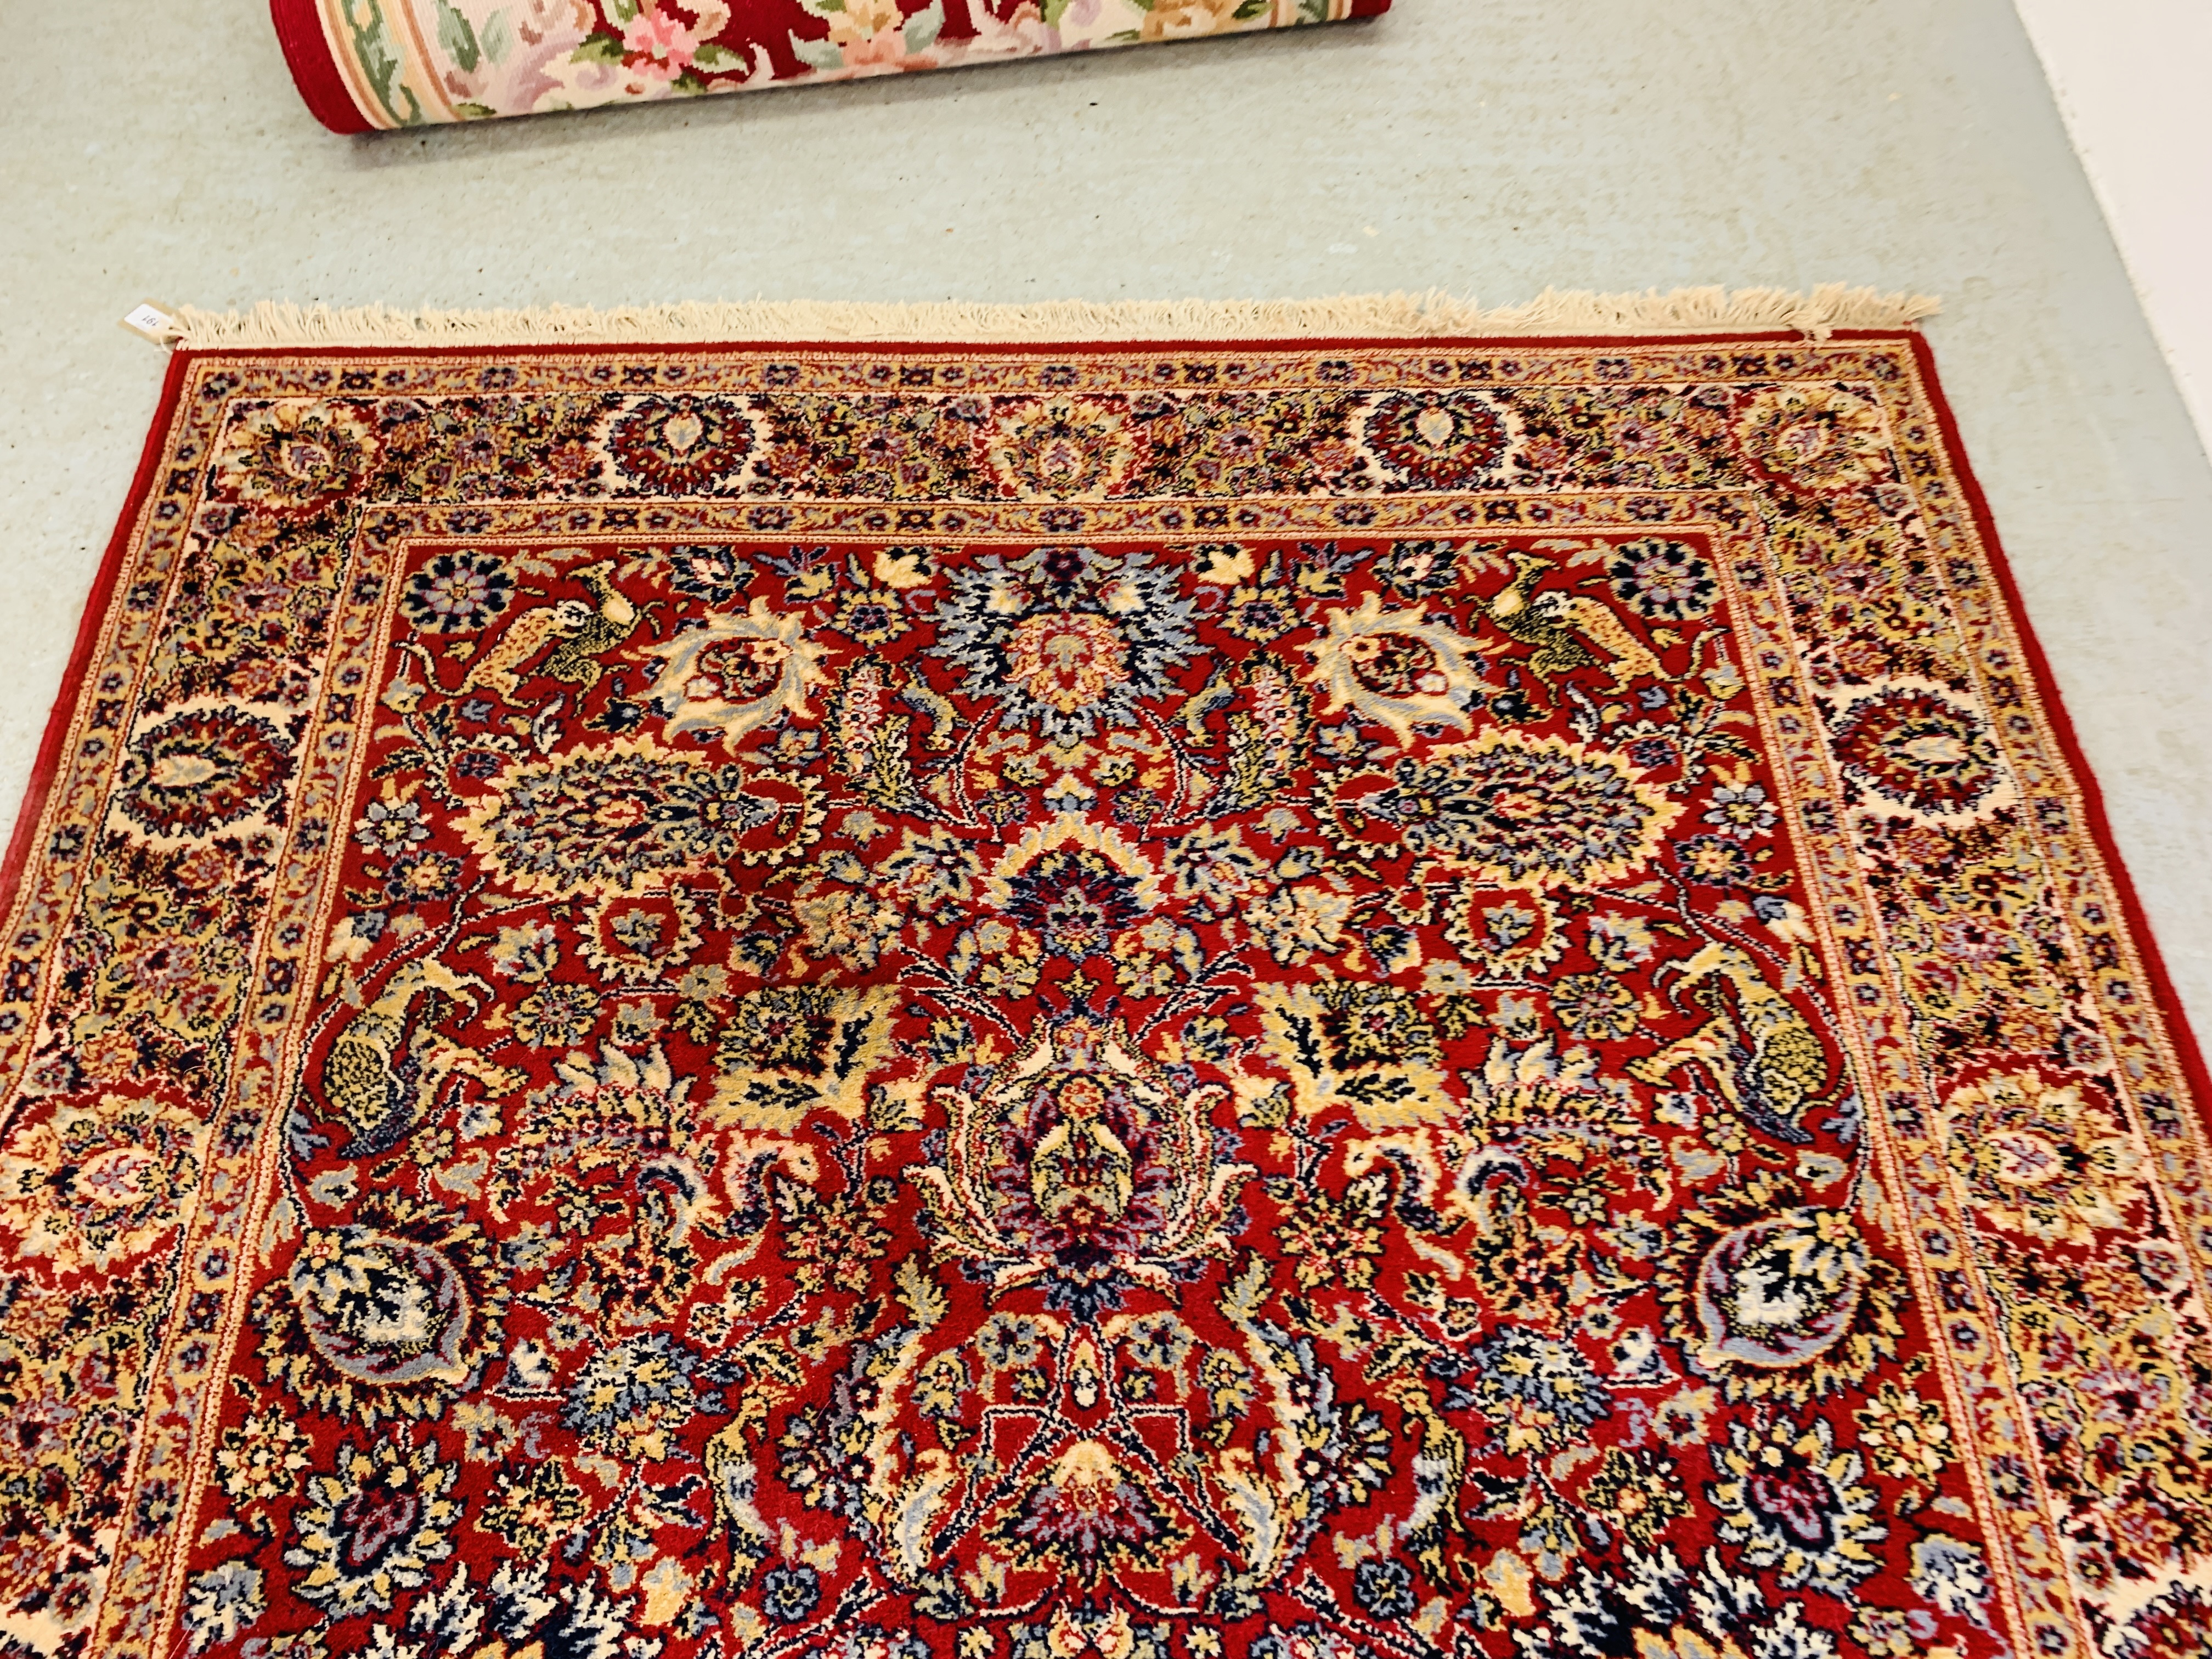 AN ORIENTAL DECORATED RUG 184CM X 92CM AND MODERN MACHINE MADE KEESHAN RED PATTERNED RUG 197 X - Image 7 of 11